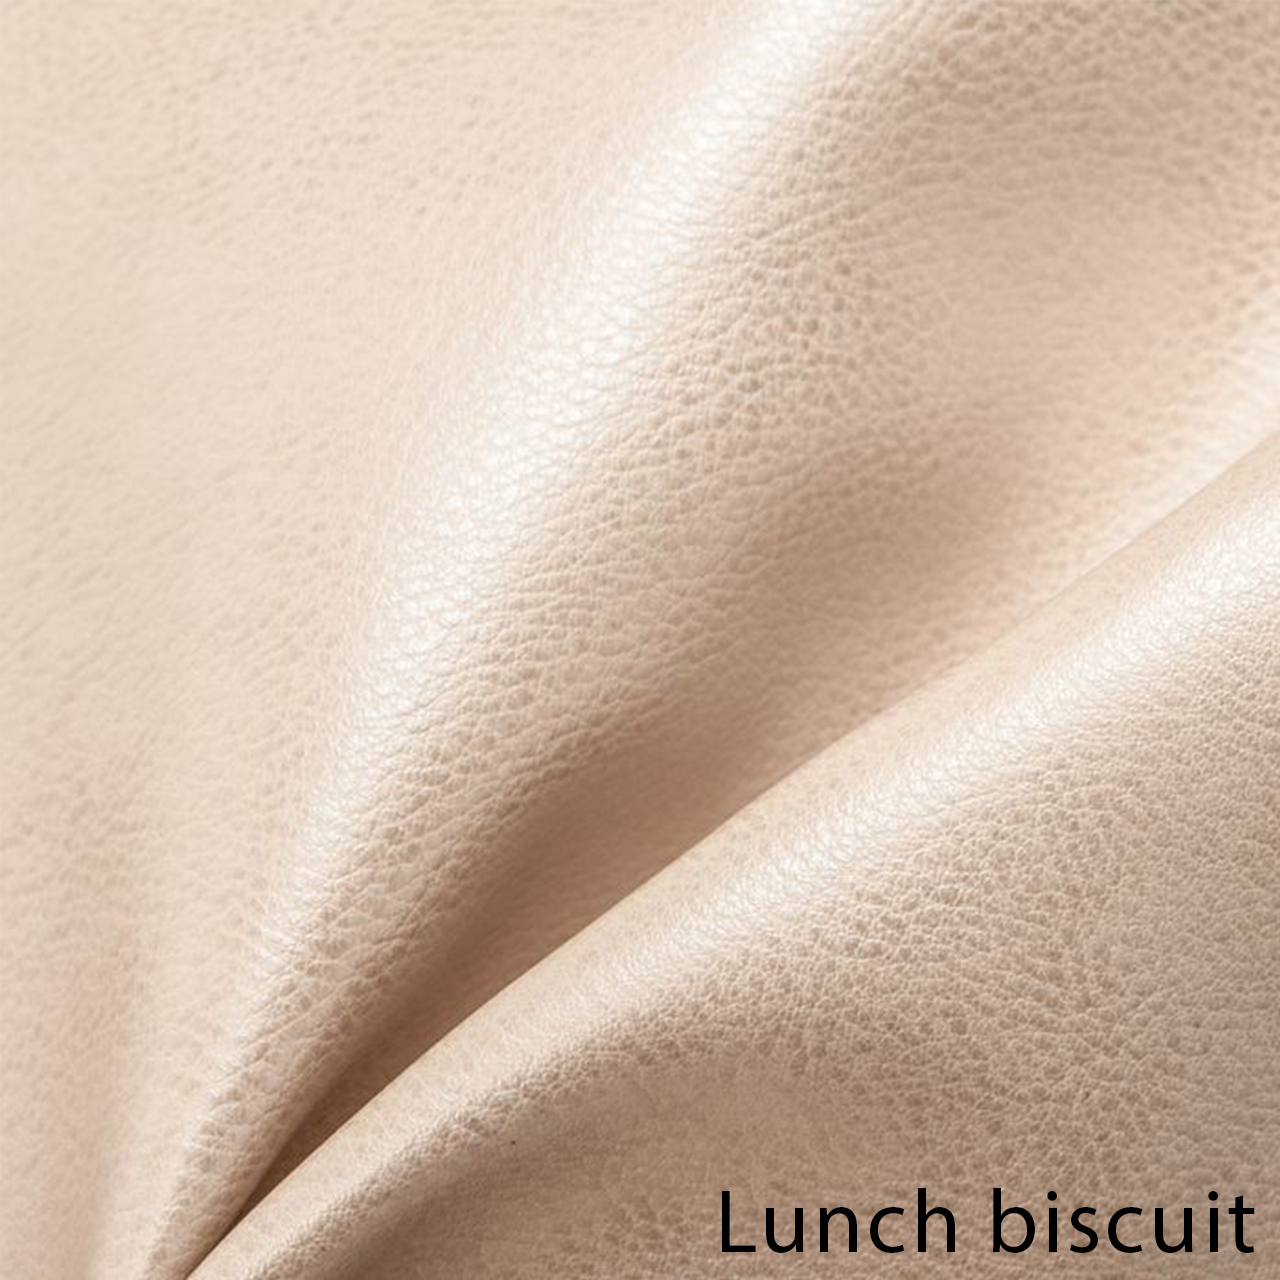 Lunch biscuit